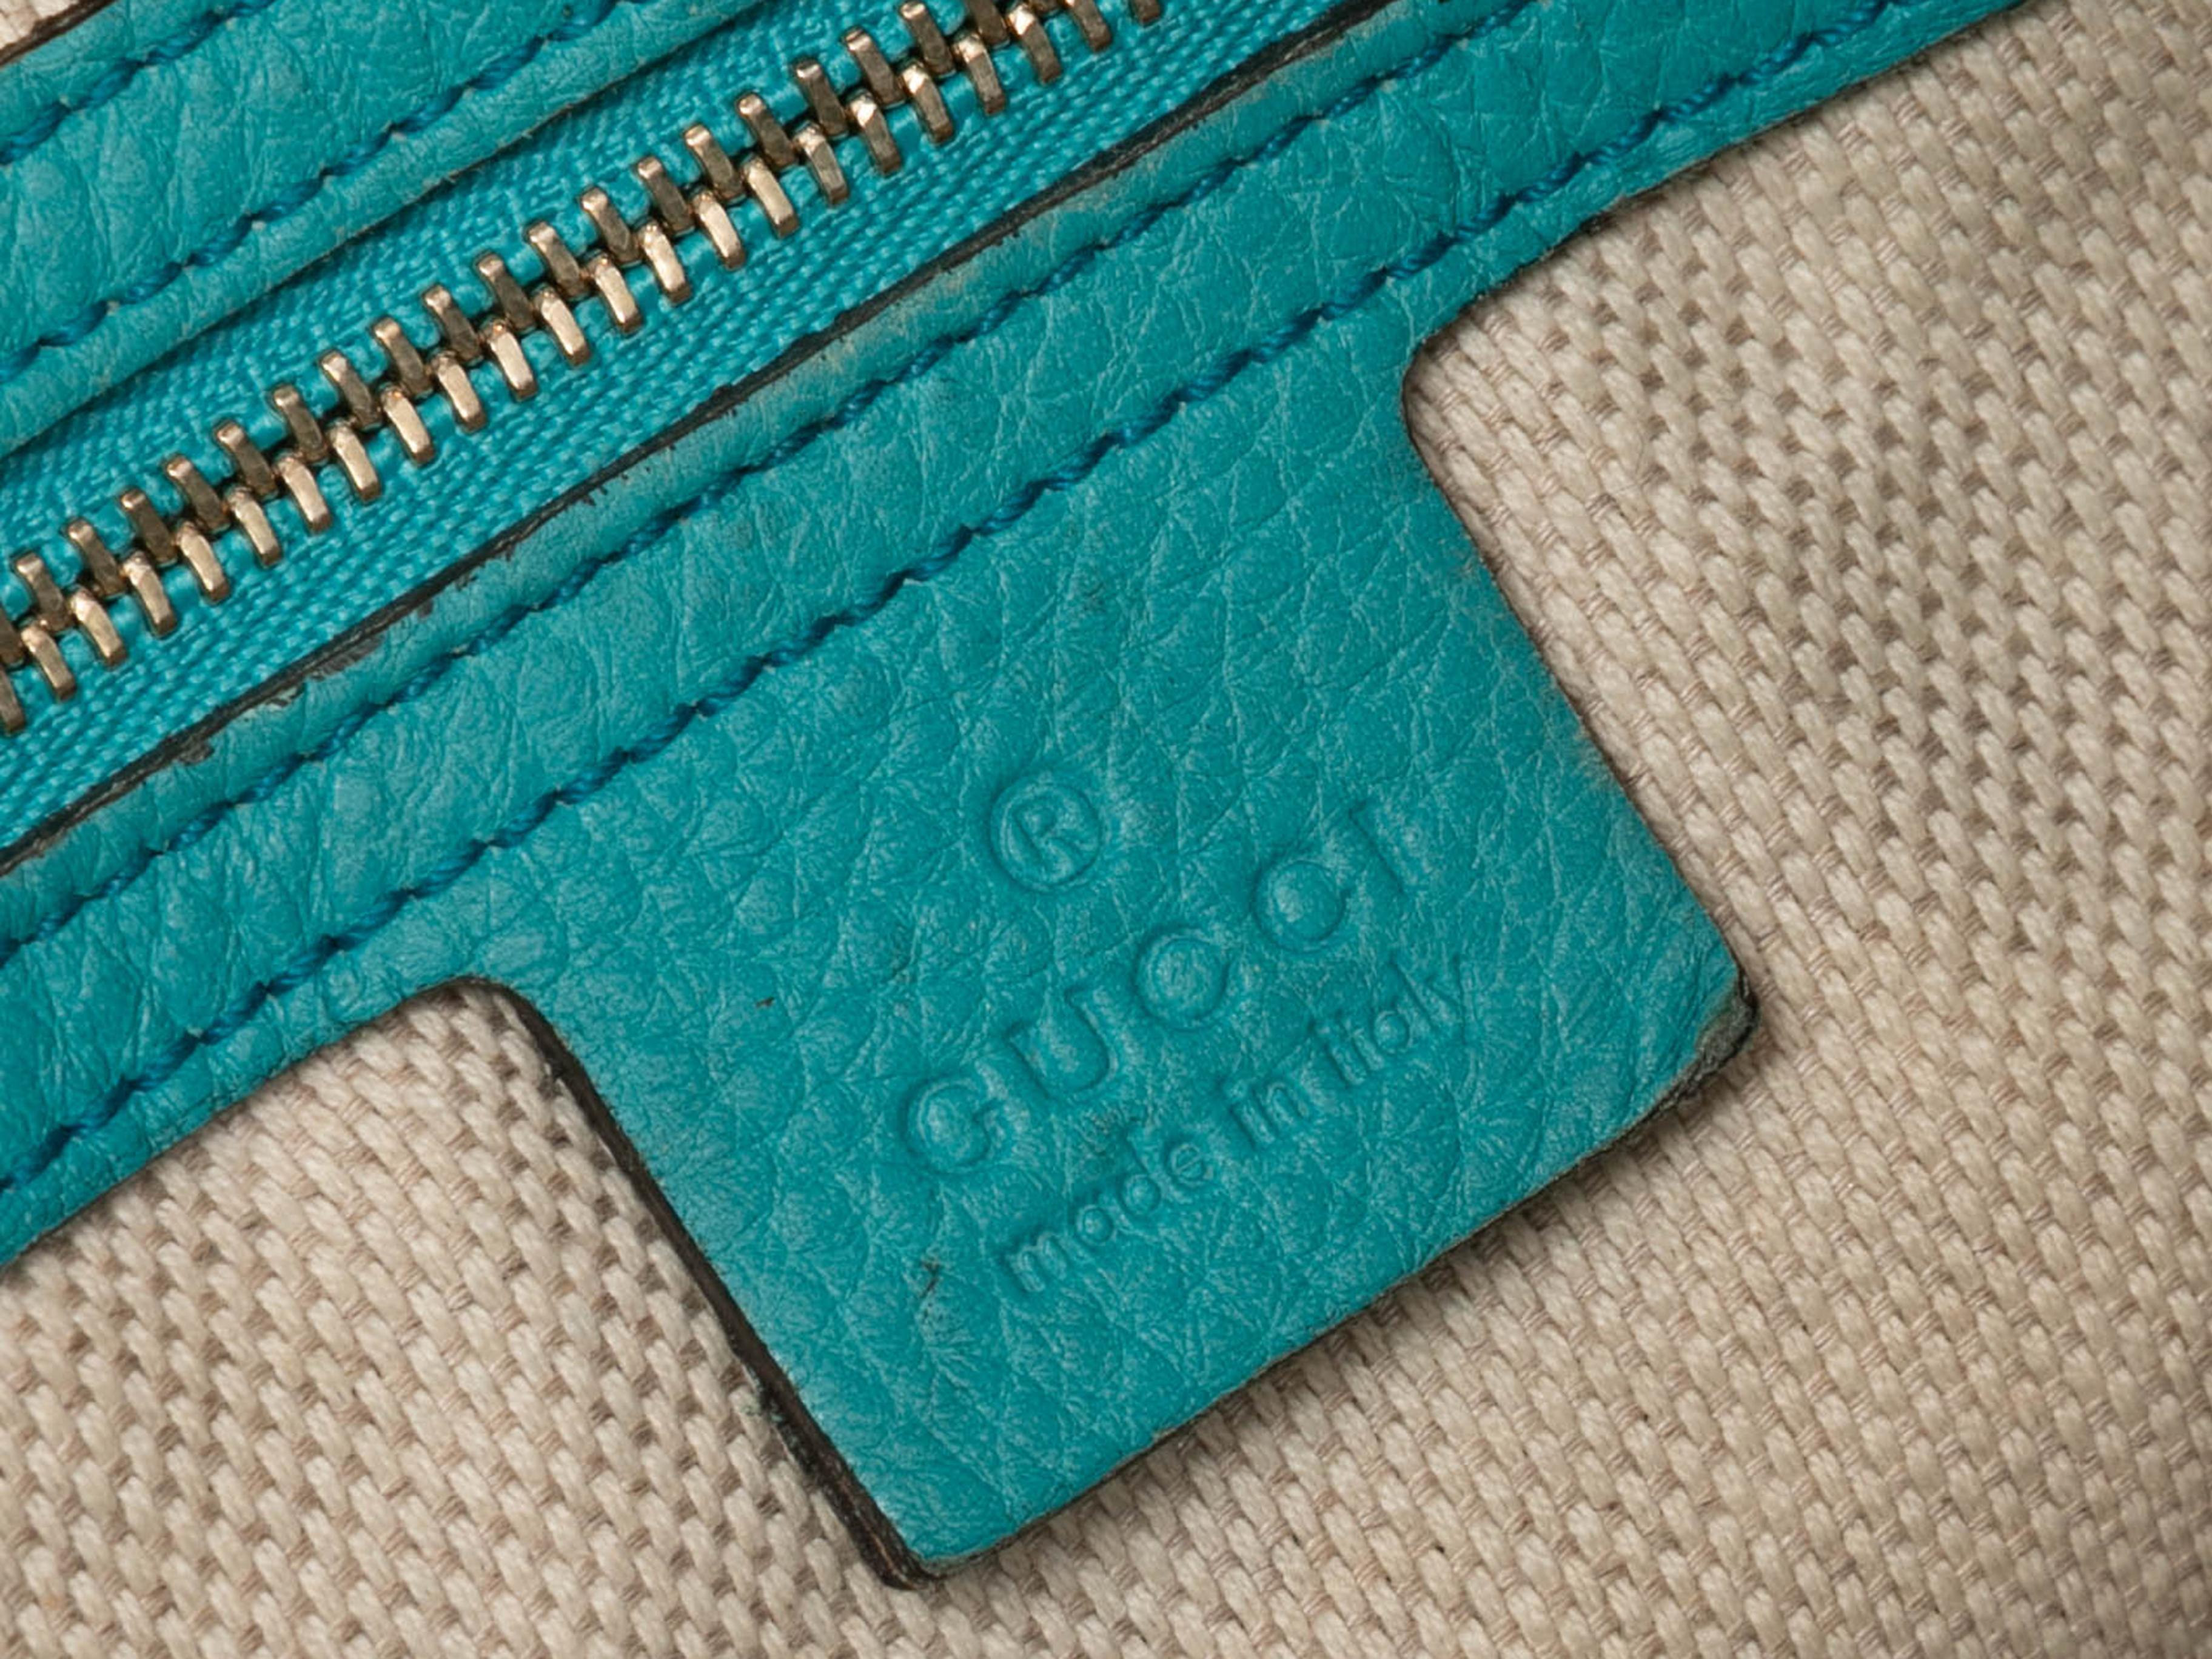 Turquoise Gucci Leather Soho Hobo Tote. The Soho Hobo Tote features a leather body, silver-tone hardware, front logo embroidery, and dual chain-link and leather shoulder straps. 18